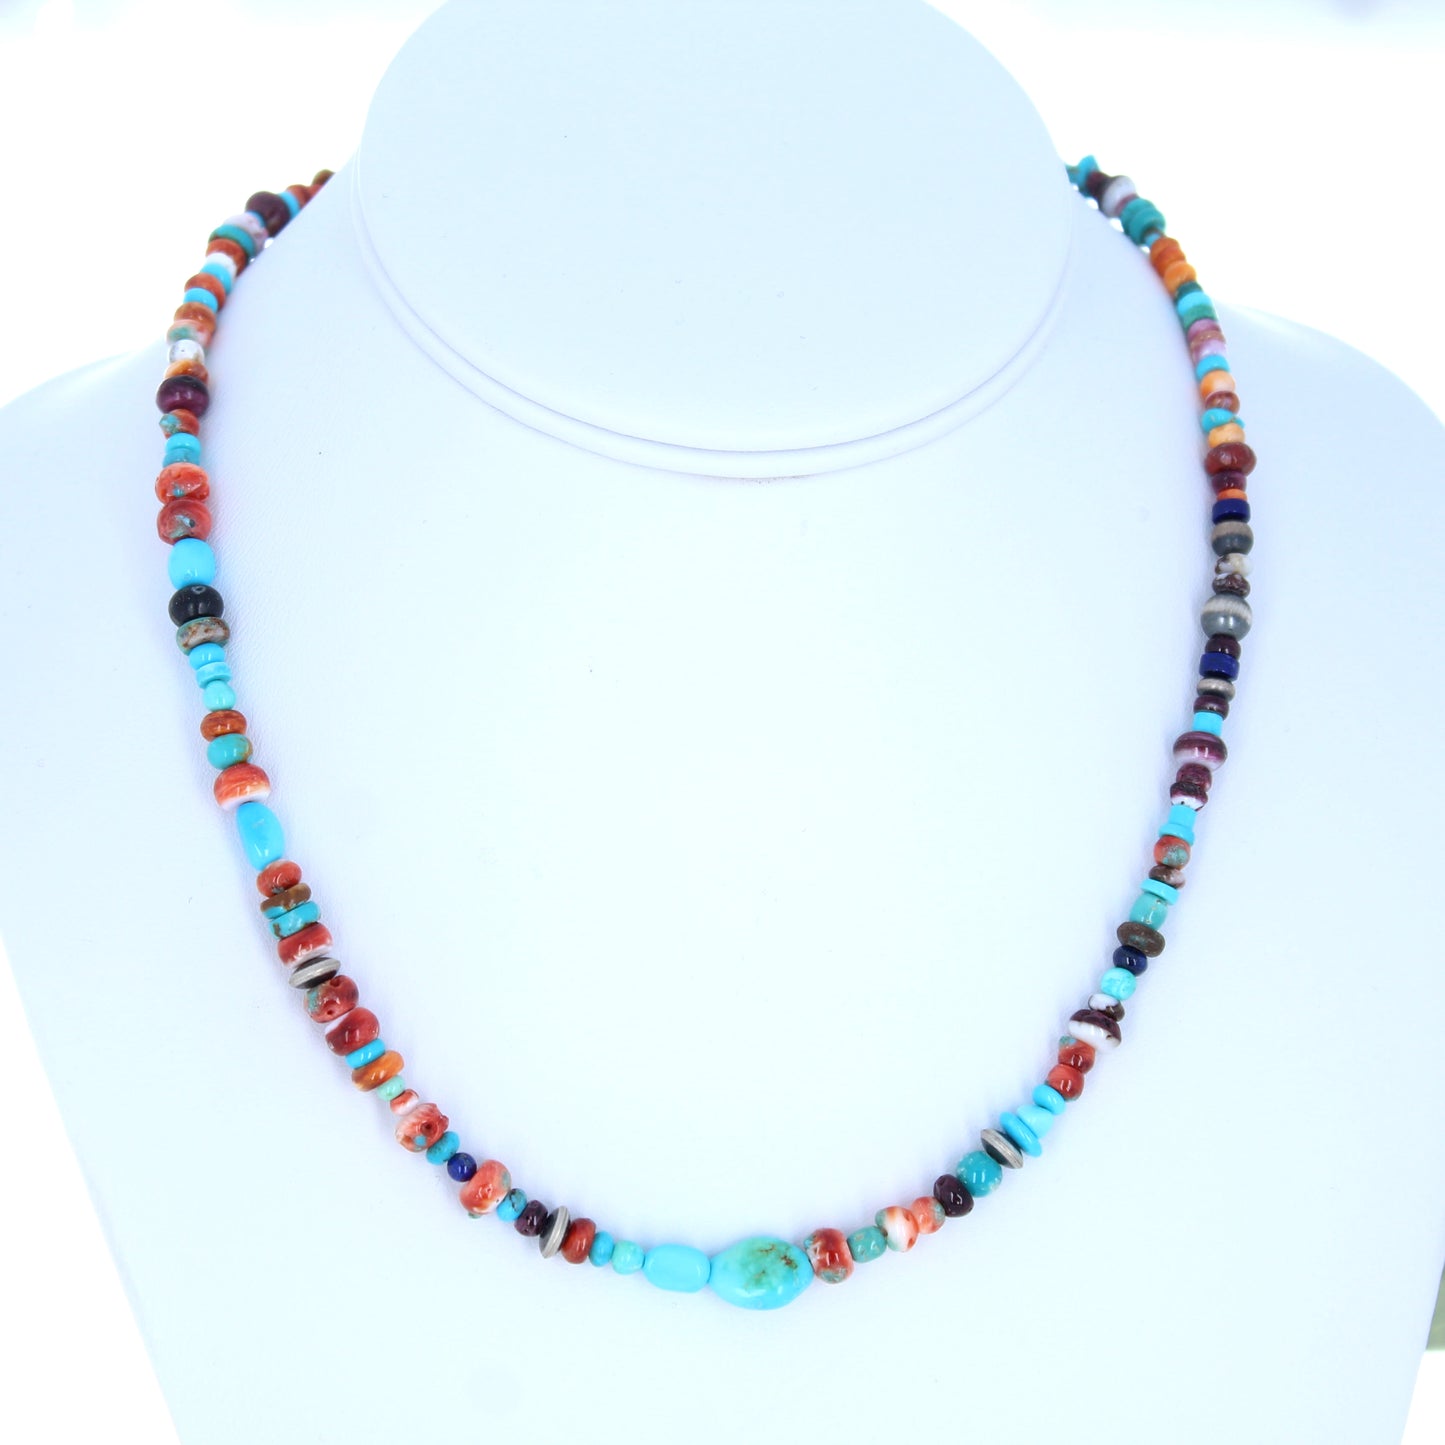 Sonoran Gold Spiny Oyster Necklace Fiesta Colors Mixed Sleeping Beauty Turquoise